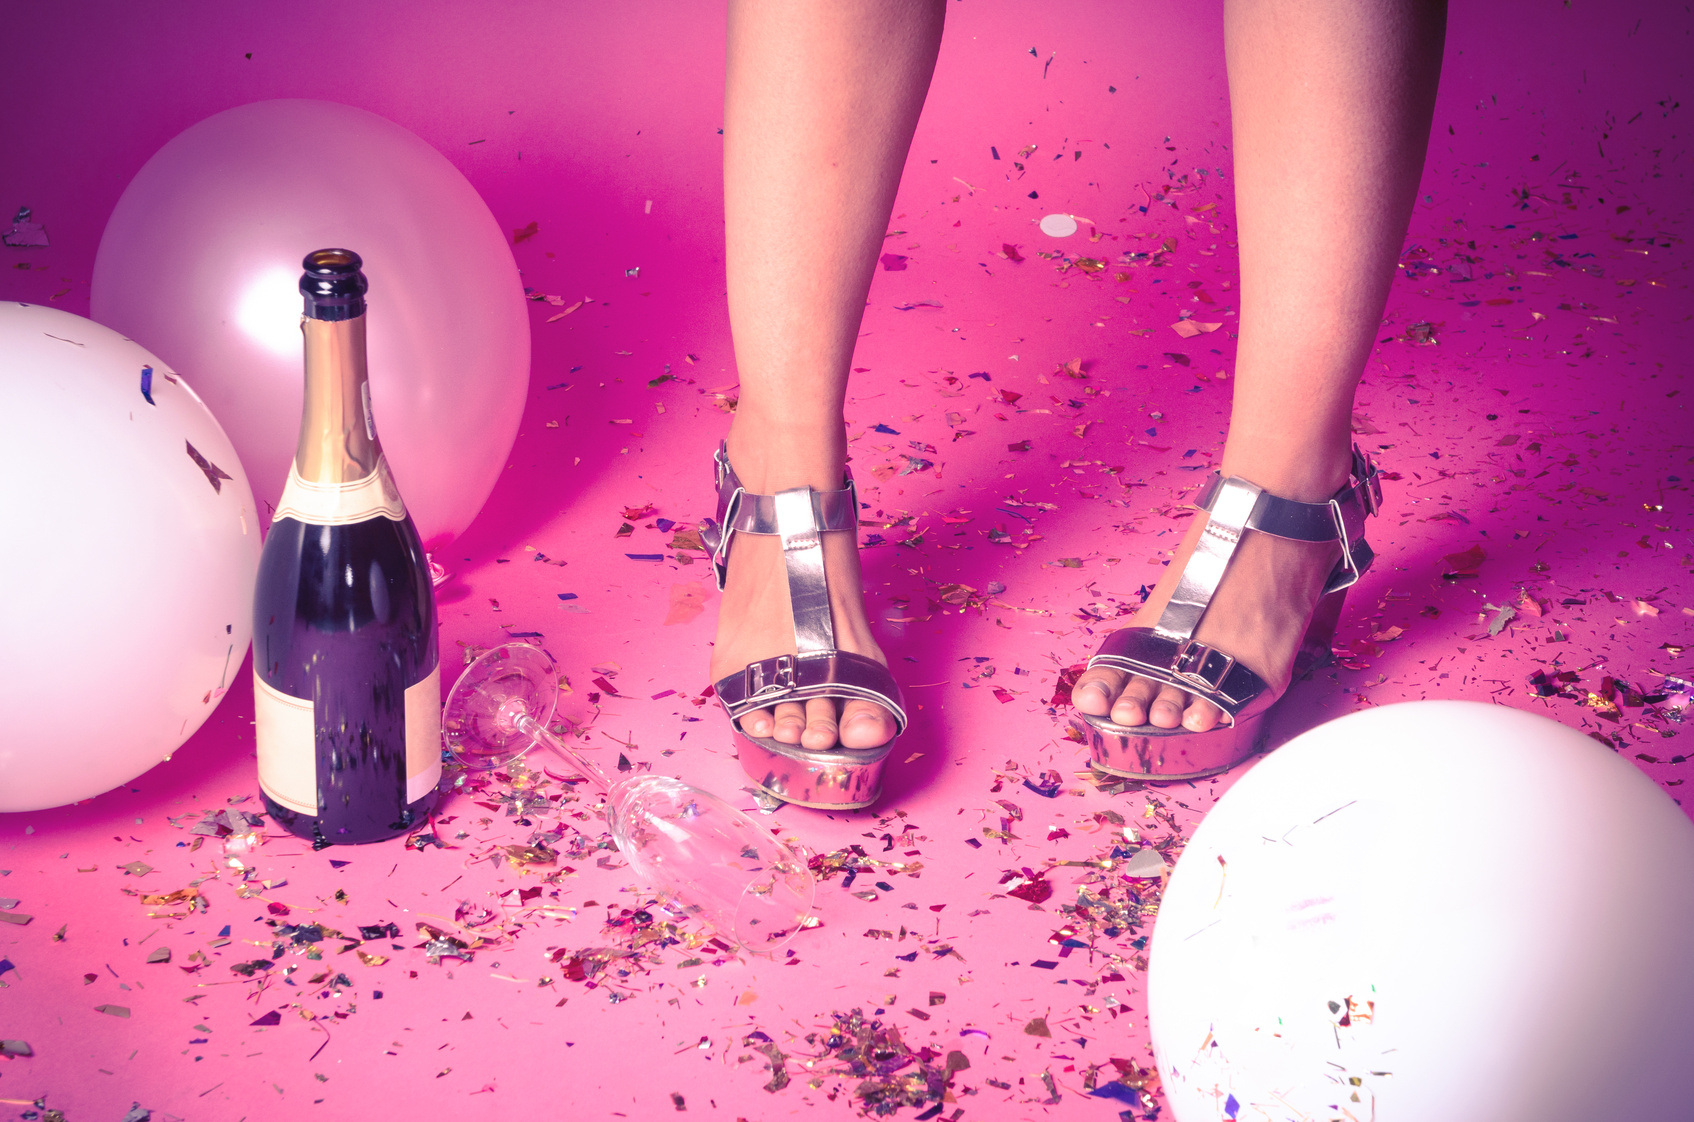 Woman’s feet with confetti on the floor and champagne